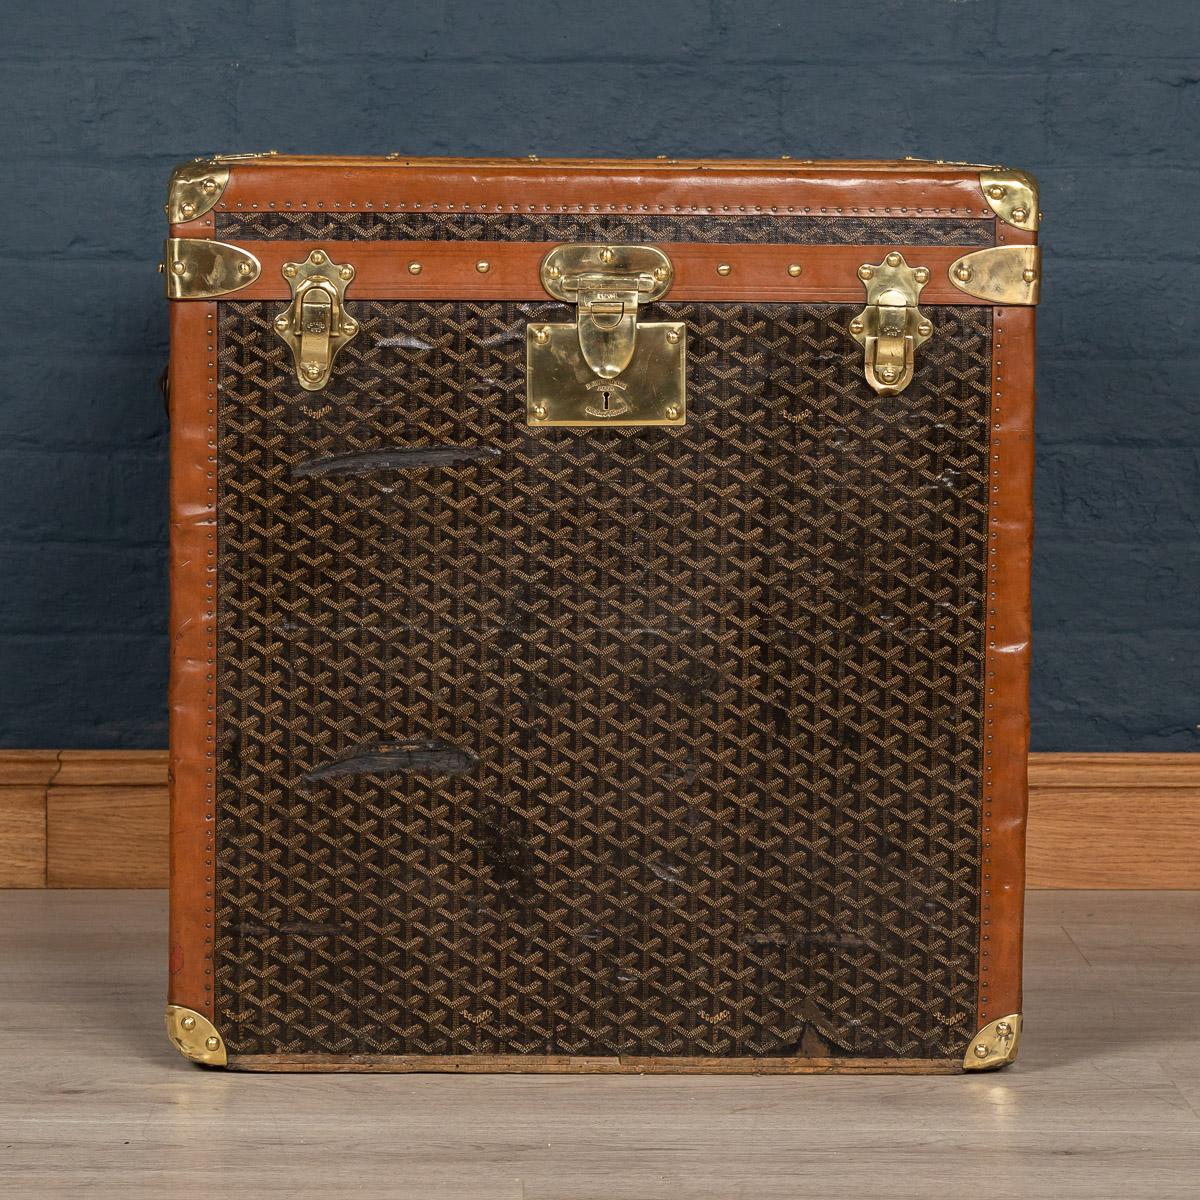 Antique early 20th century Goyard hat trunk in the world famous chevron canvas. This unusually sized trunk is in very good condition and harks back to times of passenger ships and 1st class travel of bygone eras. A wonderful conversation piece that